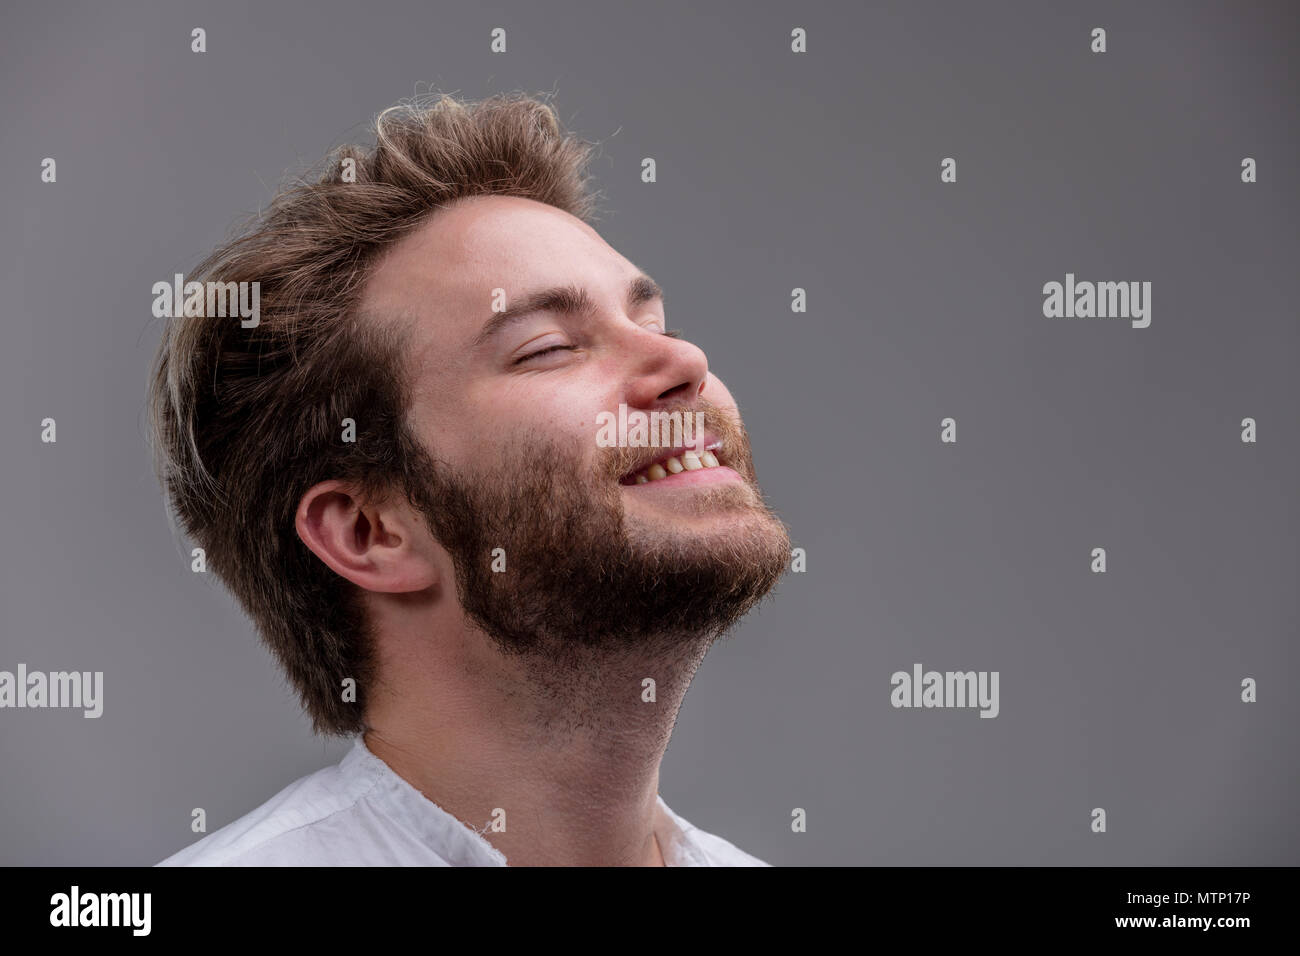 Blissful relaxed bearded young man with his head tilted back, closed eyes and a beaming smile isolated on grey with copy space Stock Photo